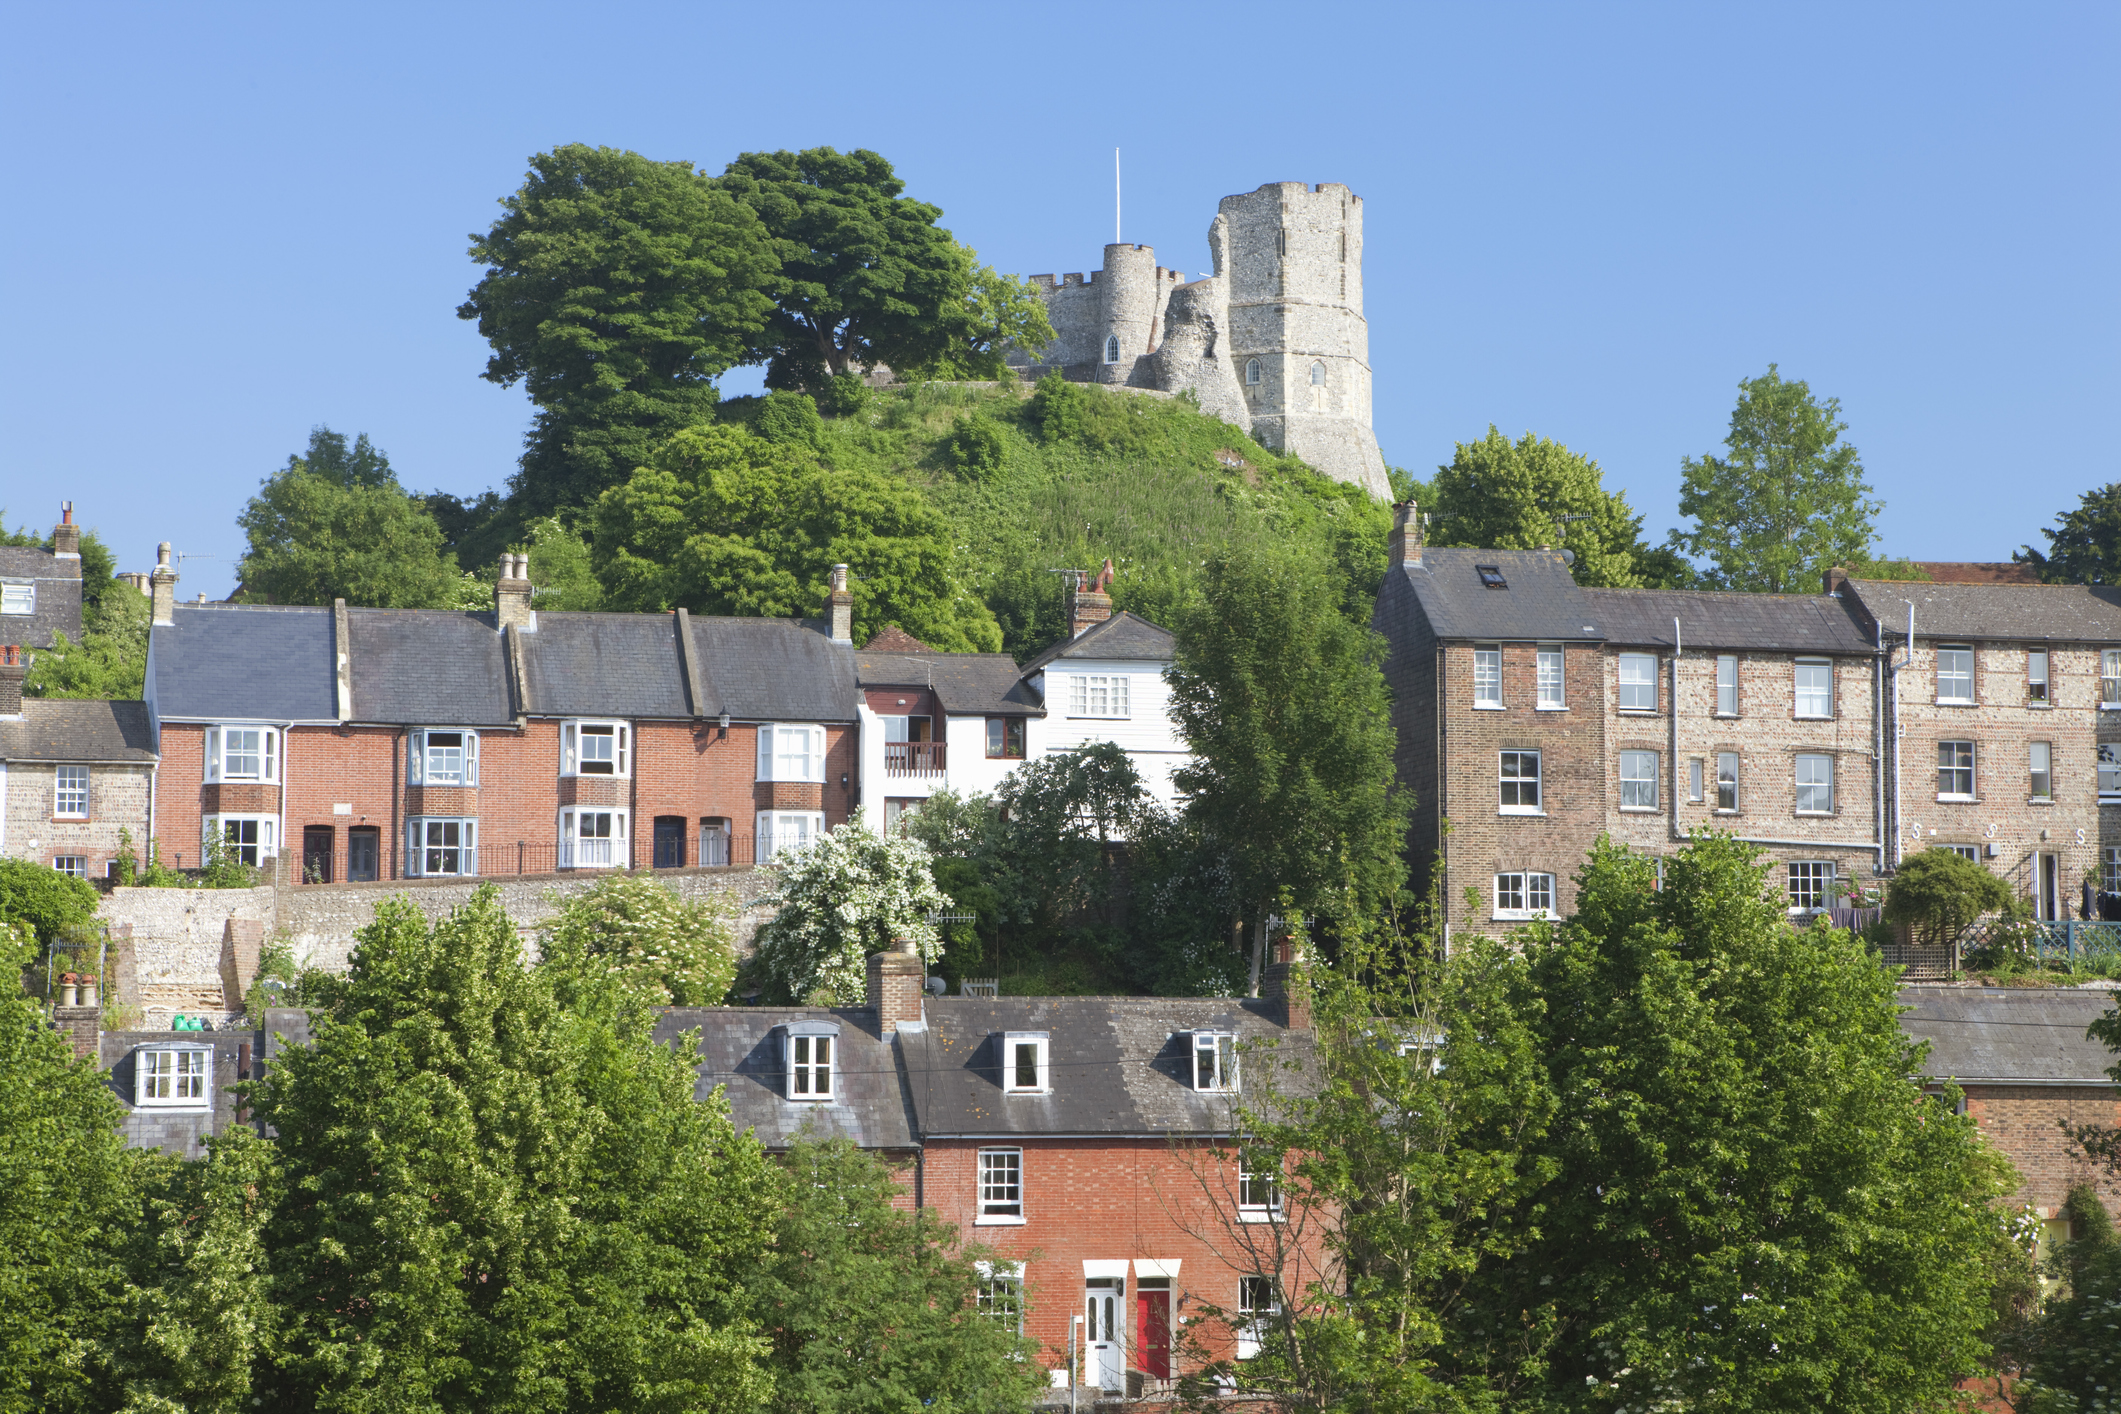 Lewes with Lewes Castle in the background